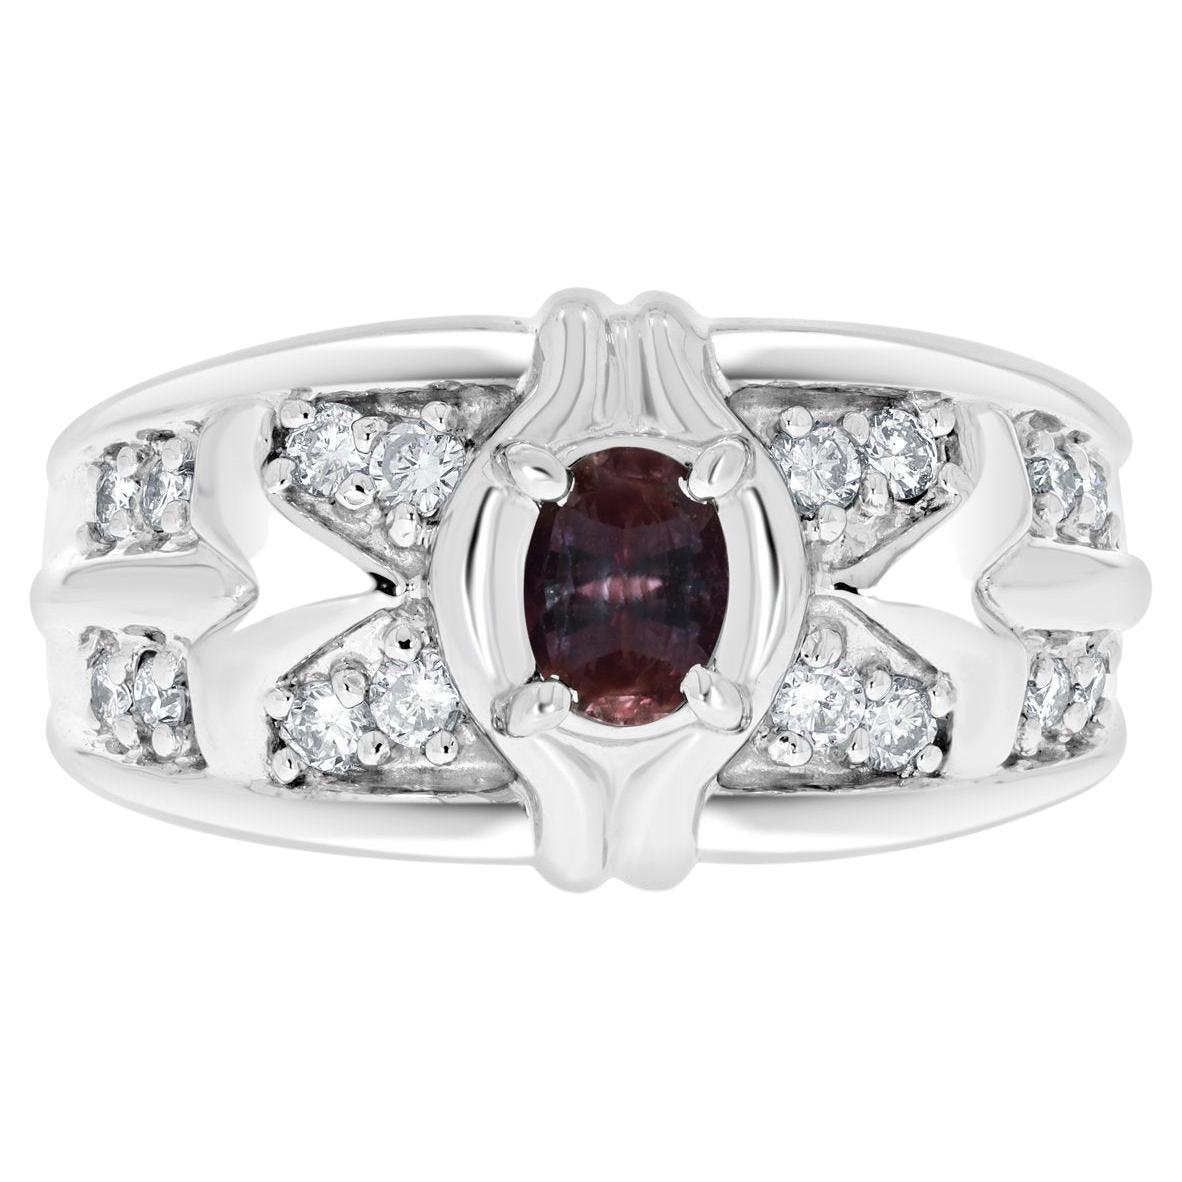 0.41ct Alexandrite Rings with 0.33tct Diamonds Set in Platinum 900 For Sale